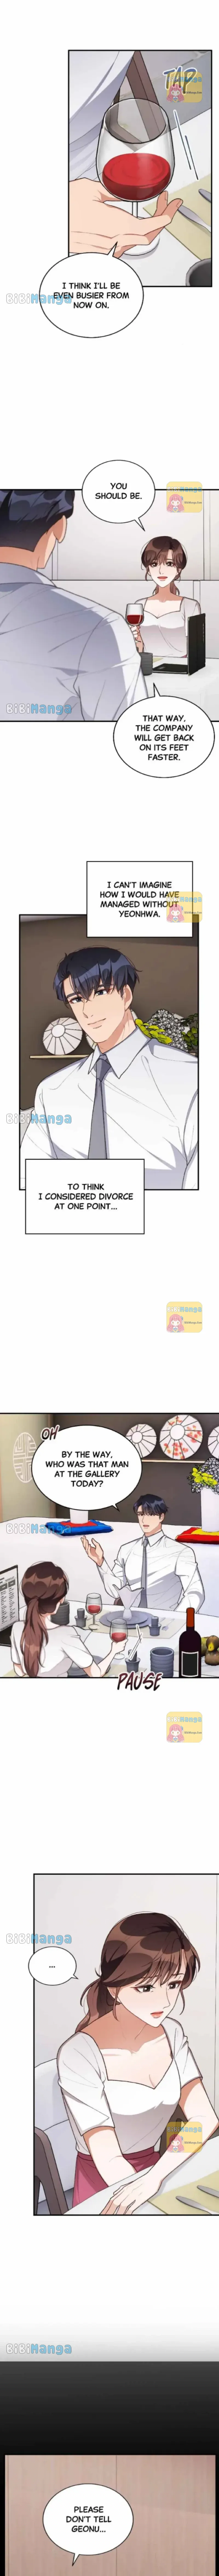 There Is No Perfect Married Couple - Page 2